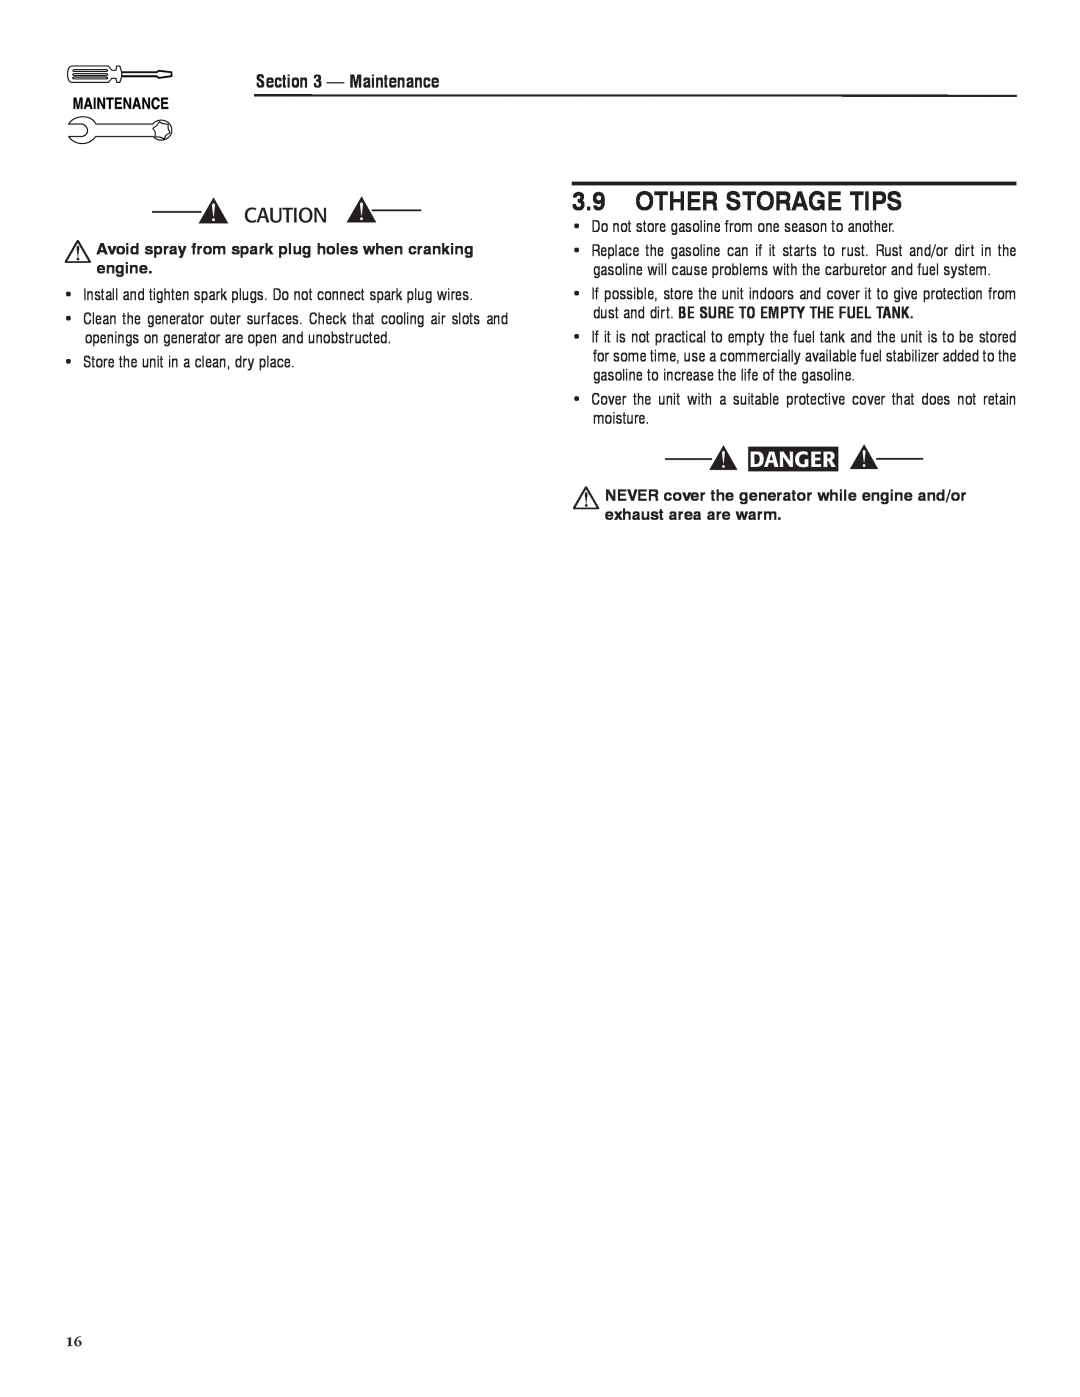 Sears 005735-0, 005734-0 manual Other Storage Tips, Danger,  Avoid spray from spark plug holes when cranking engine 